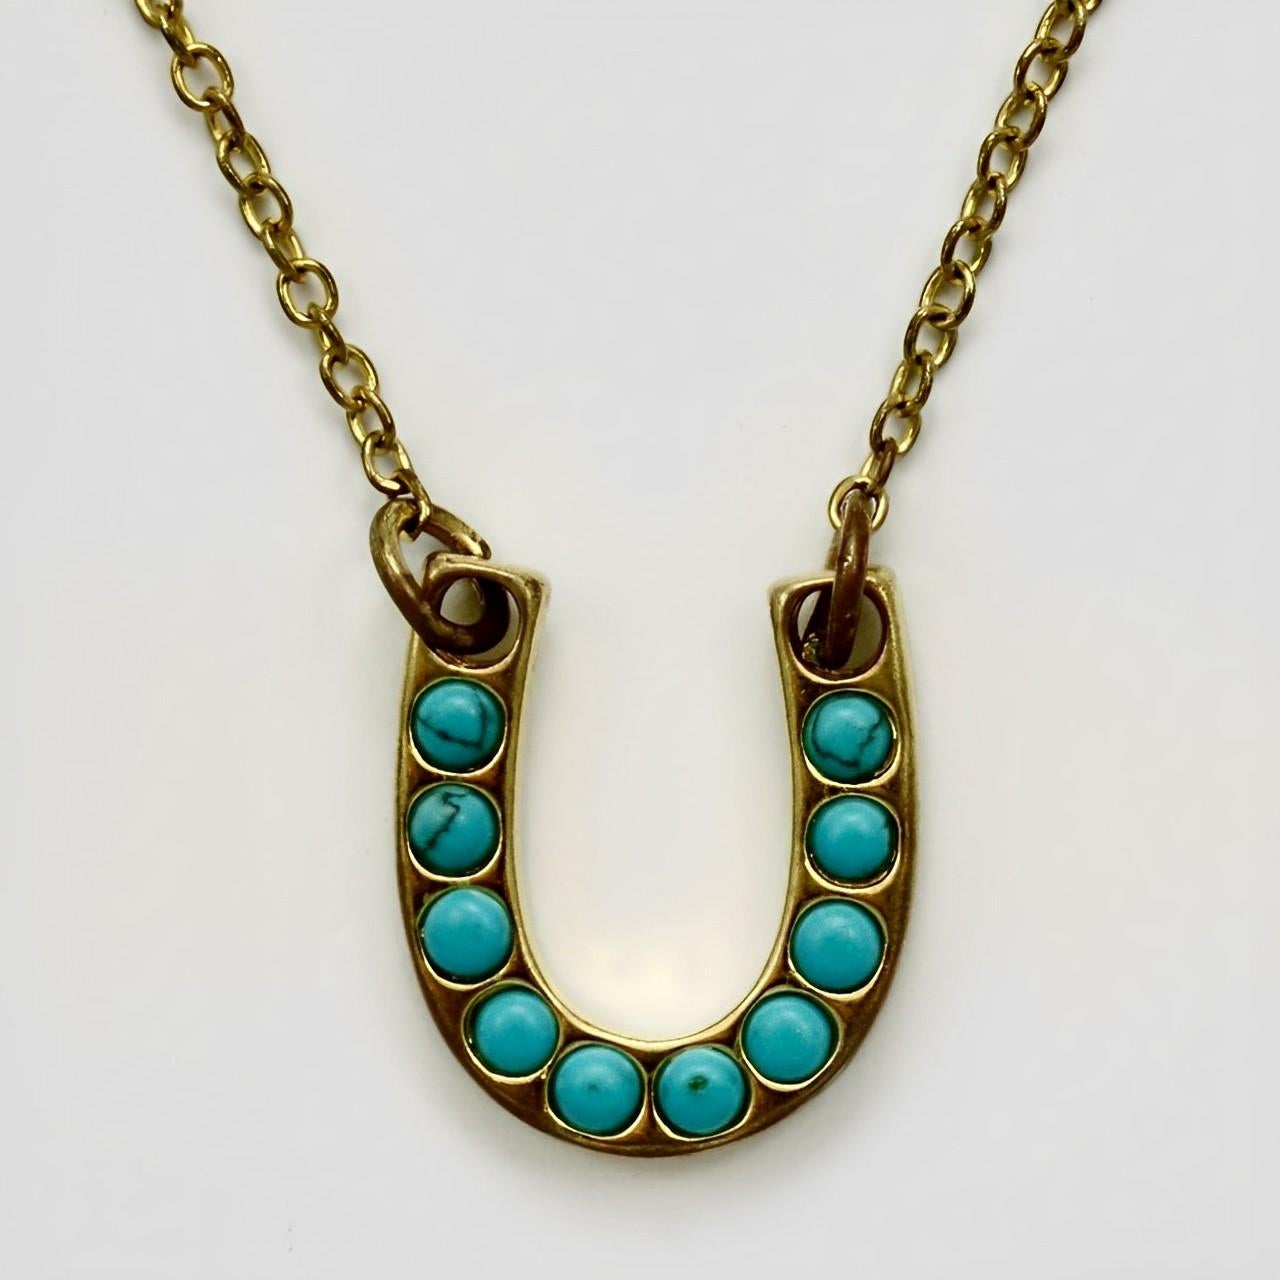 Antique gold gilt metal and turquoise horseshoe pendant and chain. Measuring length 47.5 cm / 18.7 inches, and the pendant measures length 2.1 cm / .8 inch by 1.75 cm / .68 inch. There is wear to the gold gilt. We replaced the clasp with a new